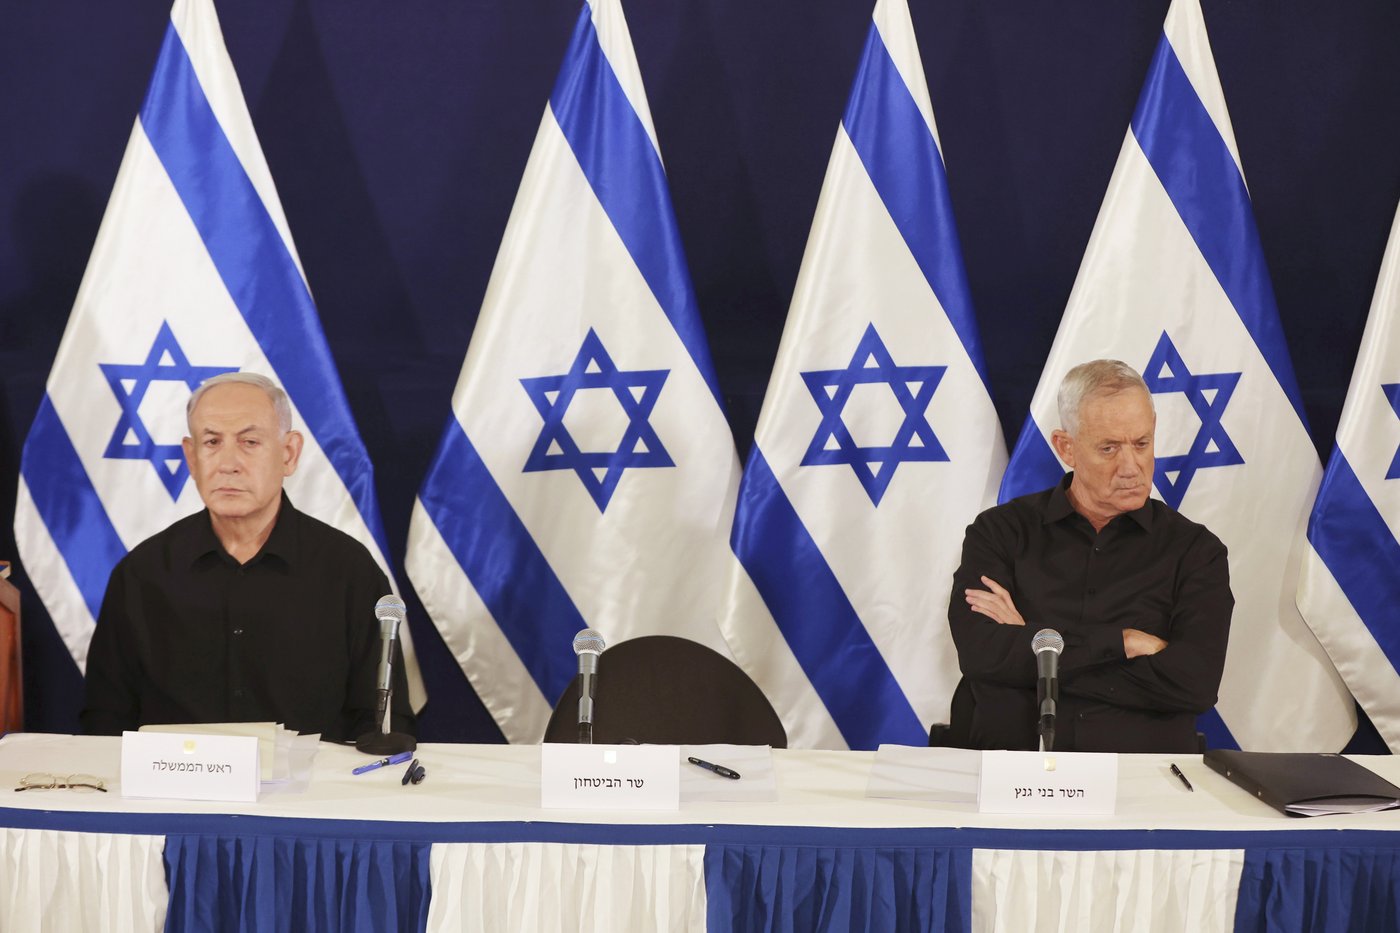 Netanyahu's top rival left Israel's war How does that affect